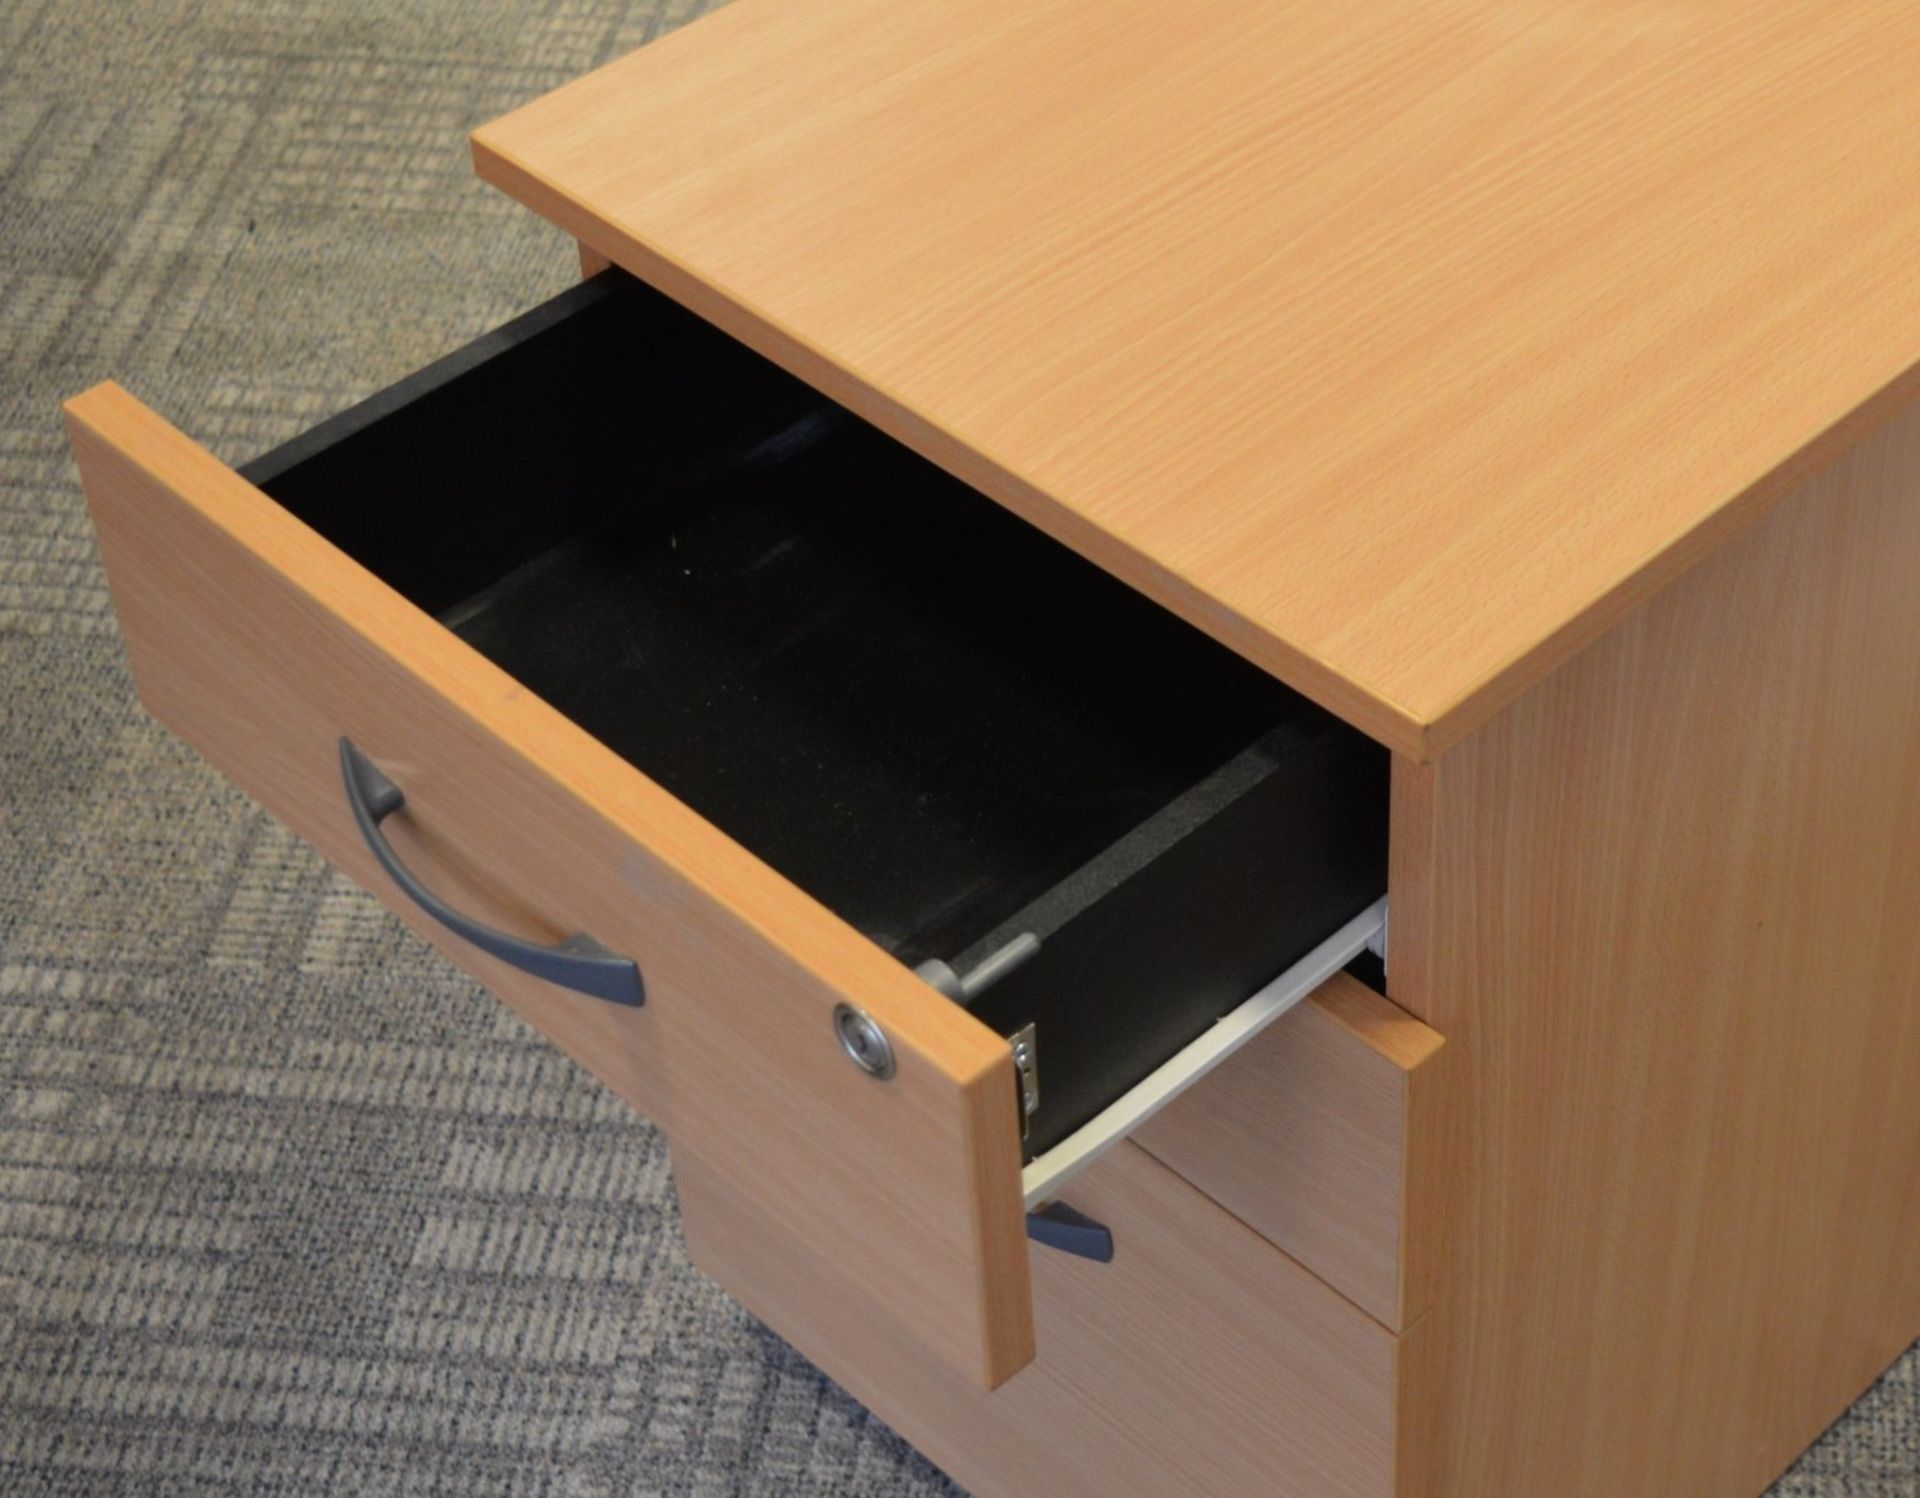 1 x Three Drawer Mobile Pedestal Drawers - With NO Key - Modern Beech Finish - Two Storage Drawers - Image 2 of 4